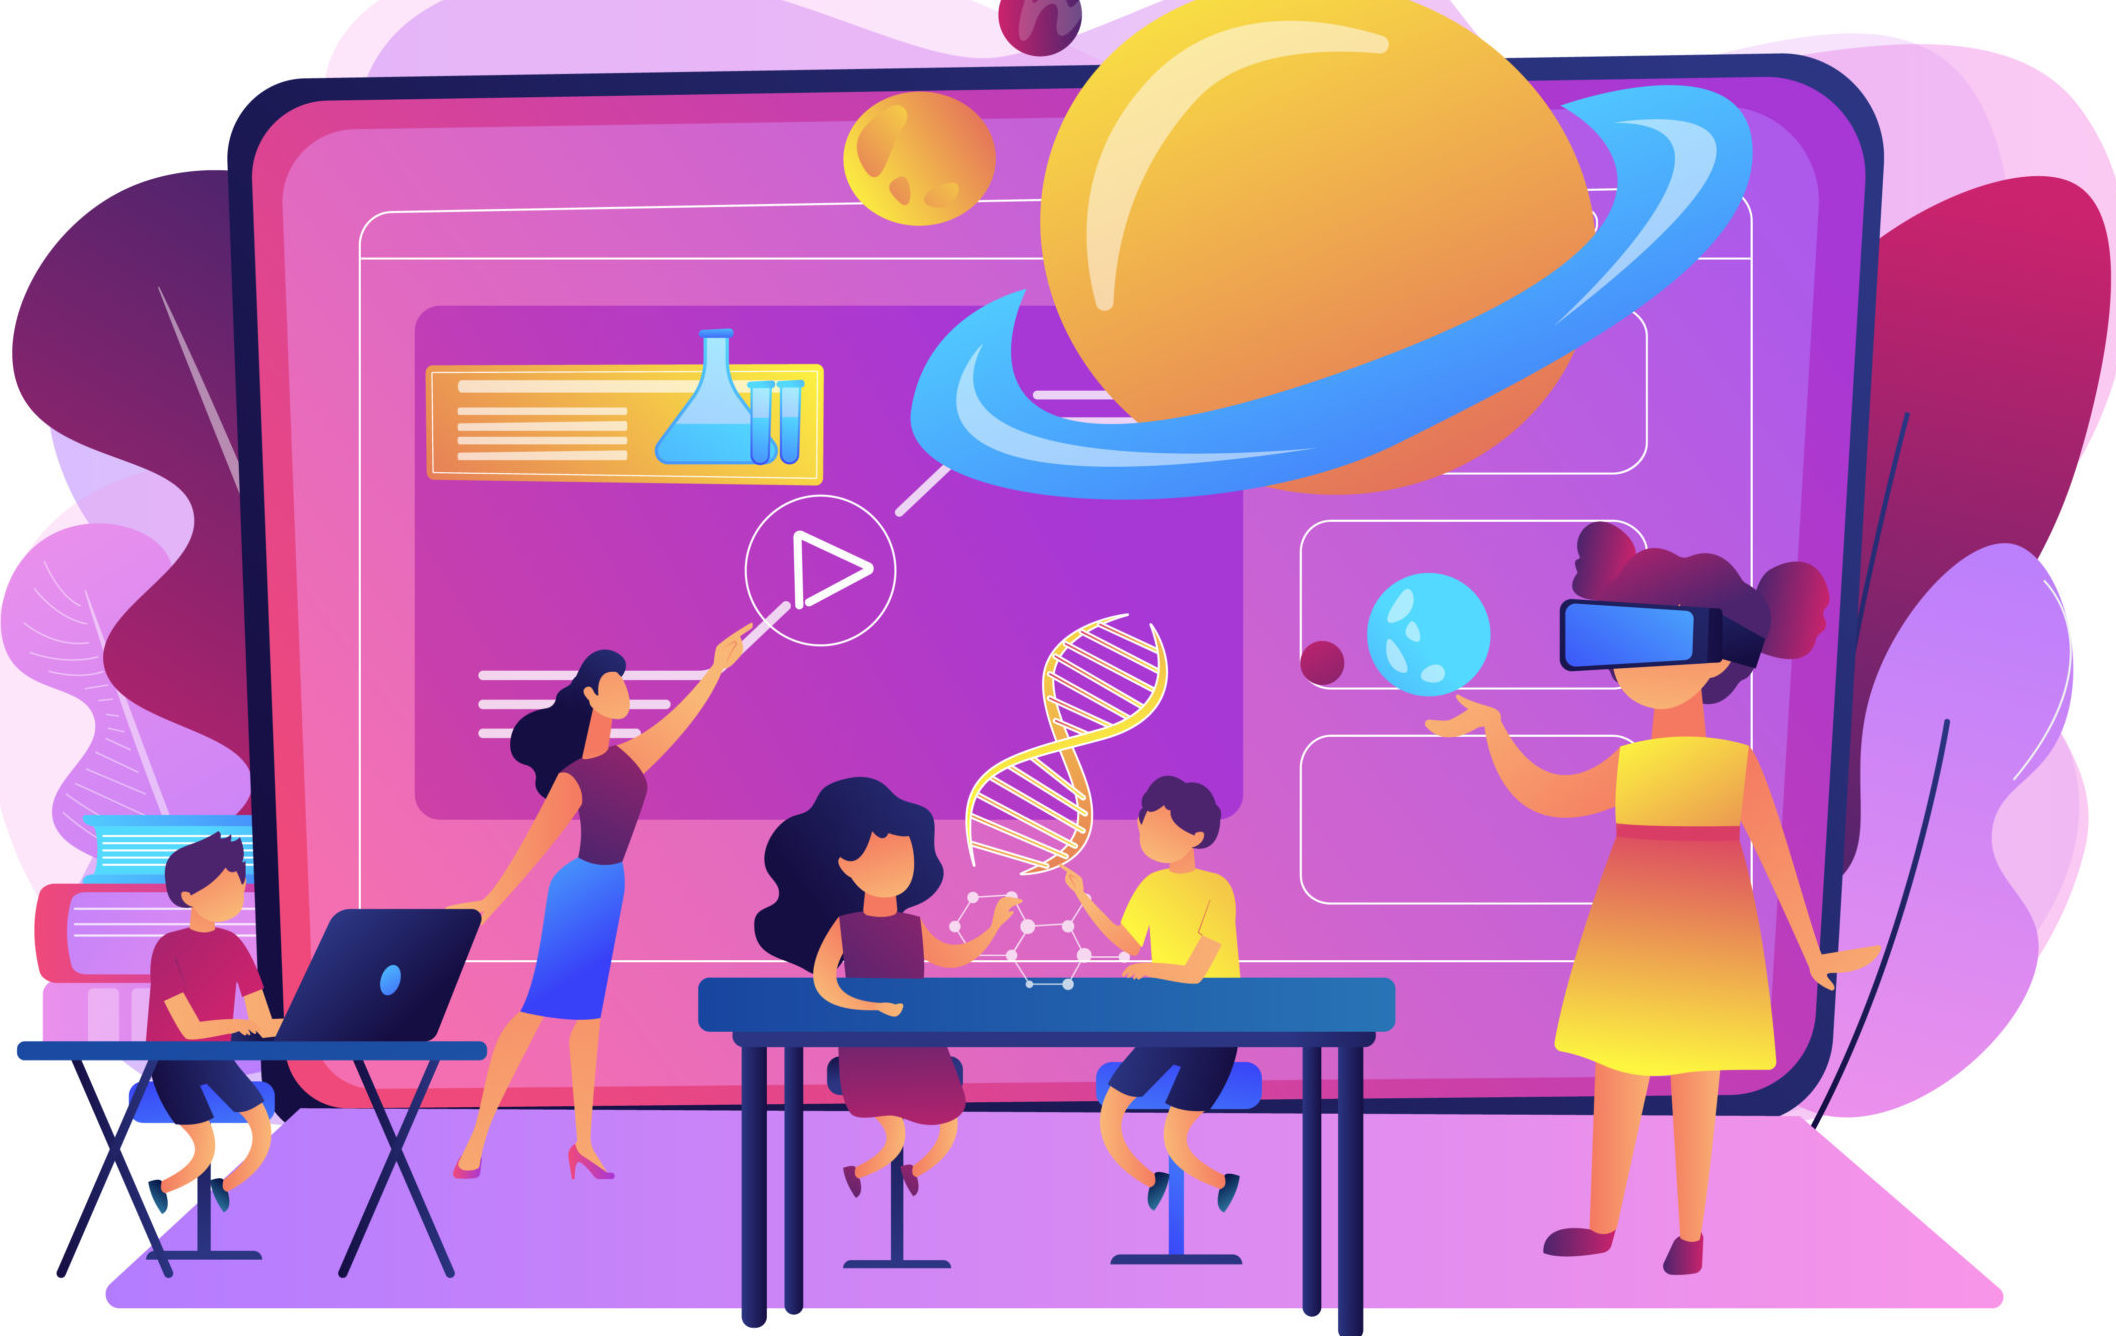 Futuristic classroom, little children study with high tech equipment. Smart spaces at school, AI in education, learning management system concept. Bright vibrant violet vector isolated illustration